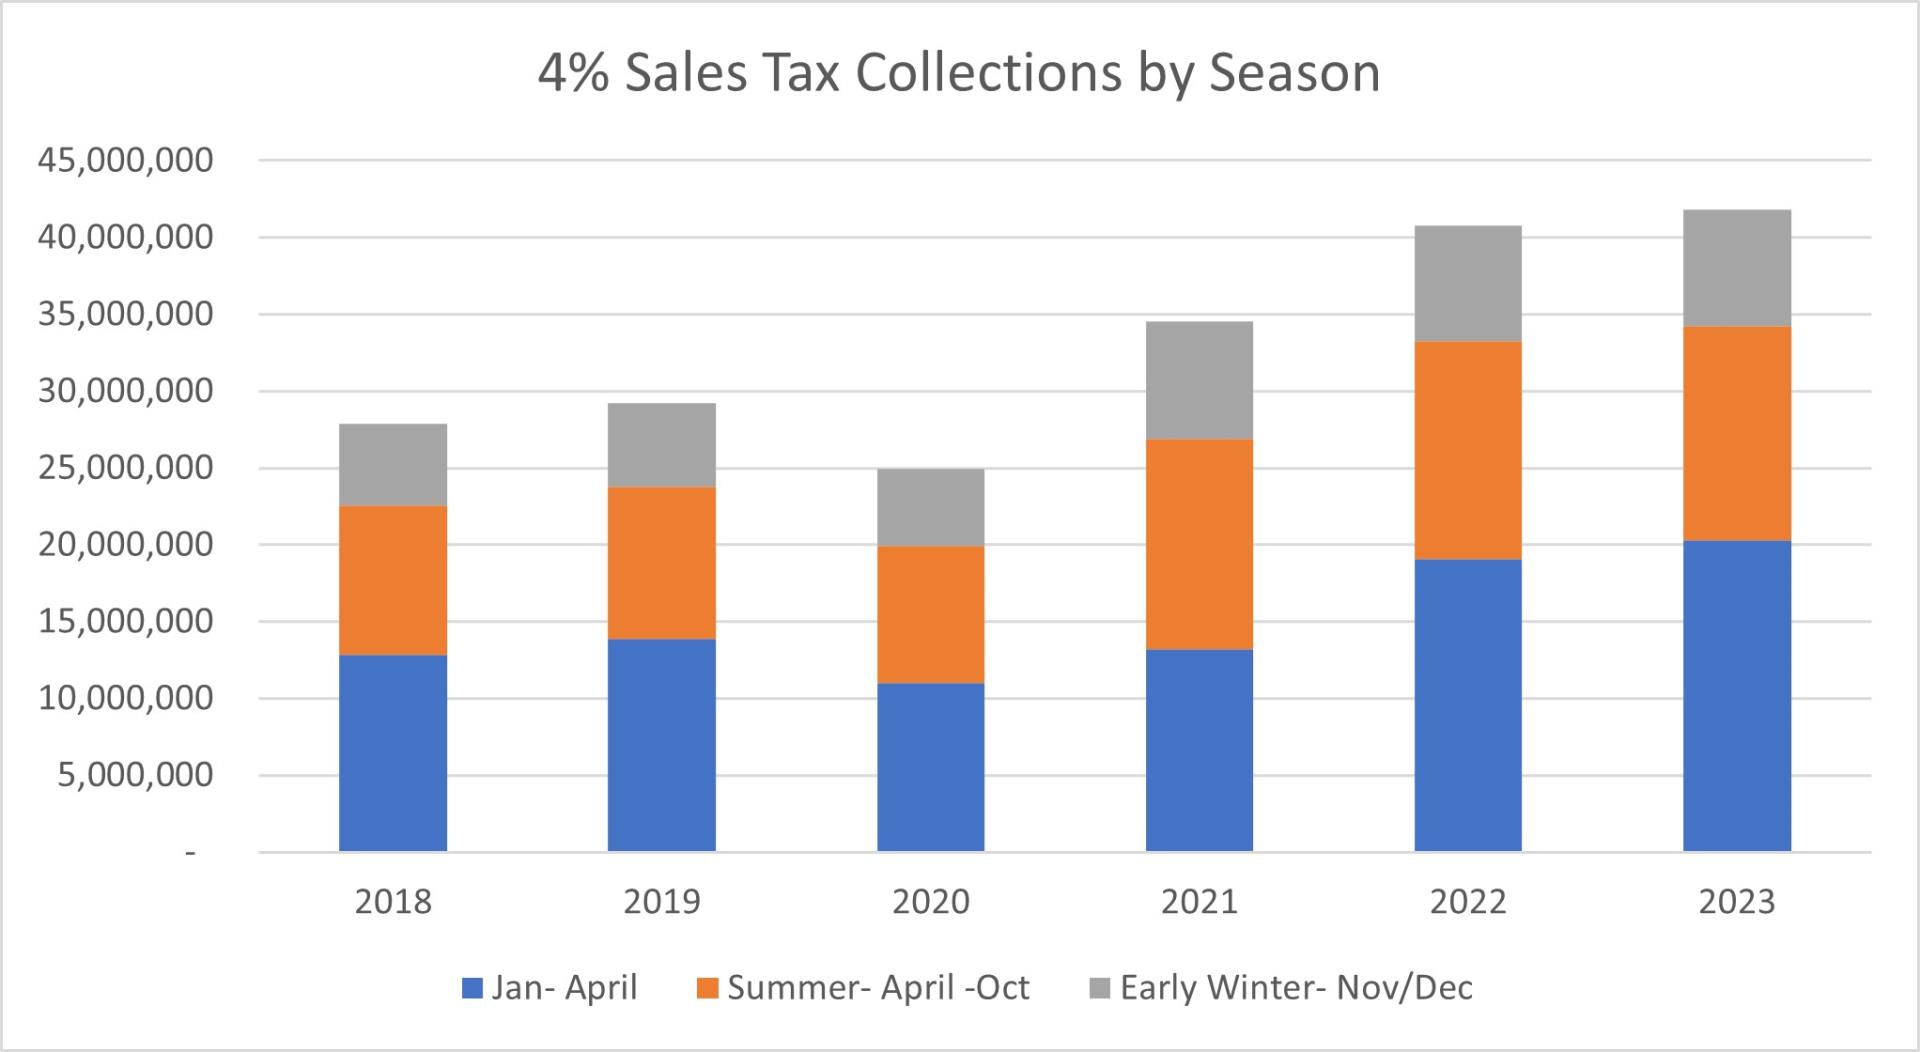 4% Sales Tax Collections by Season